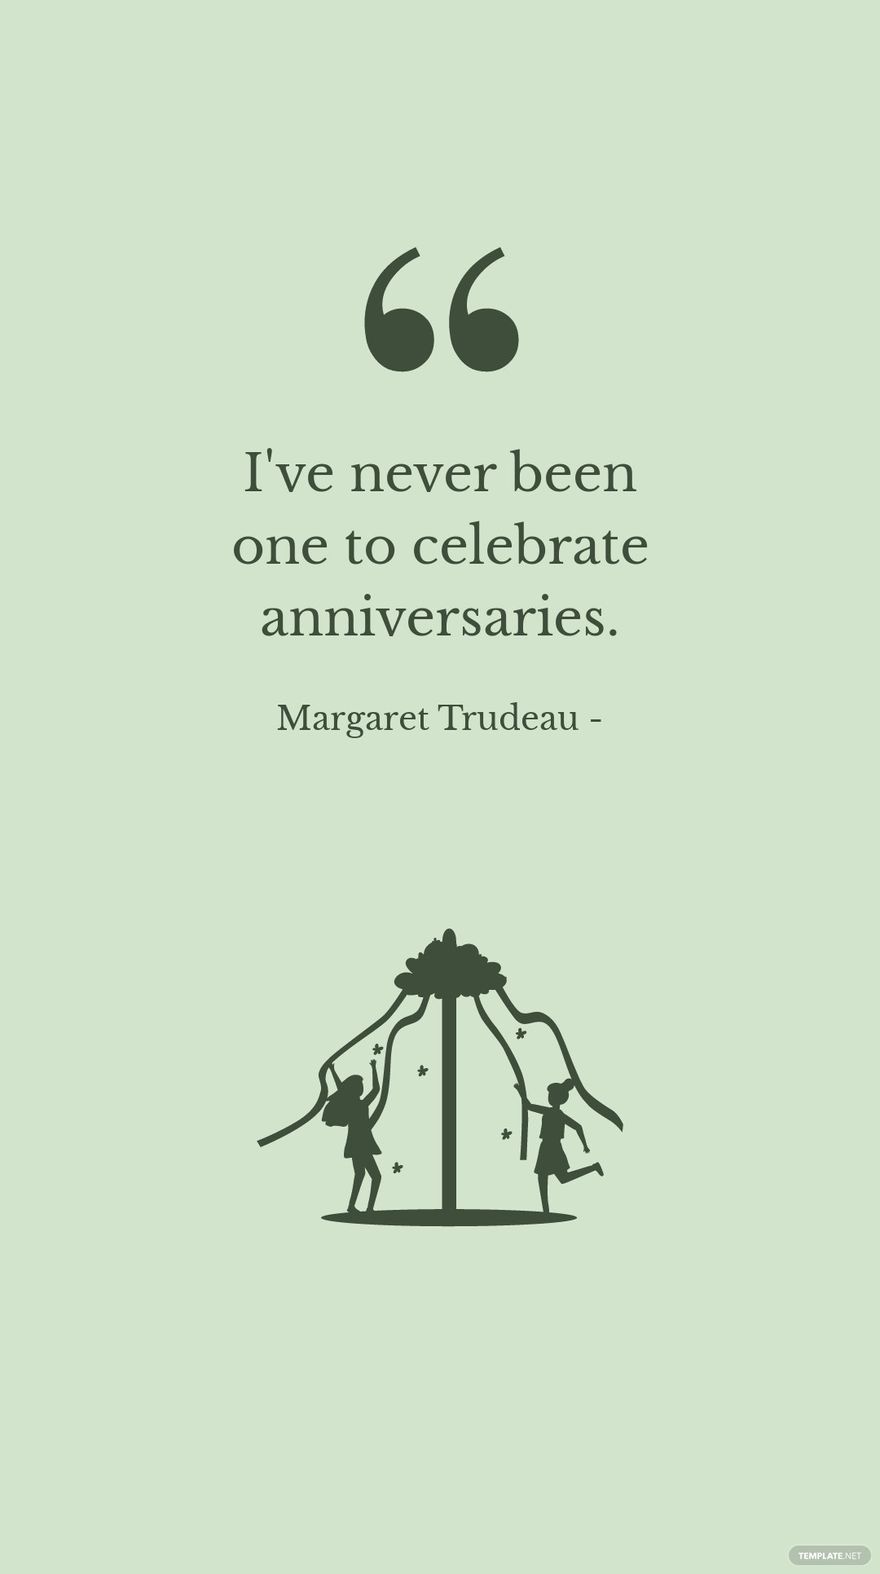 Free Margaret Trudeau - I've never been one to celebrate anniversaries. in JPG